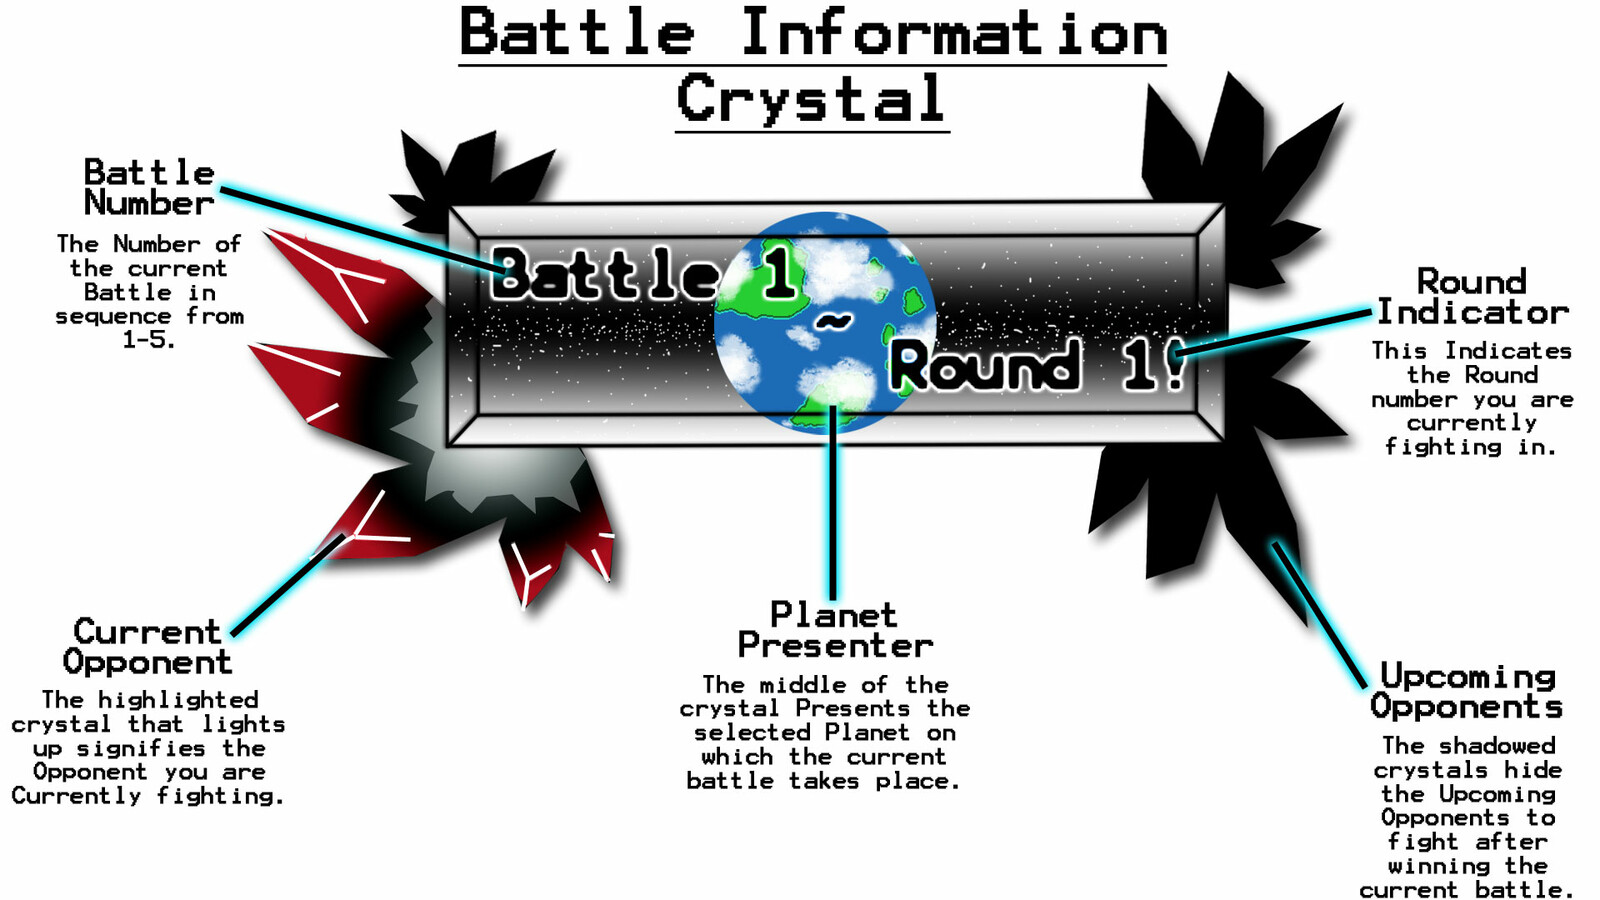 Explanation of the Battle Information Crystal sprite